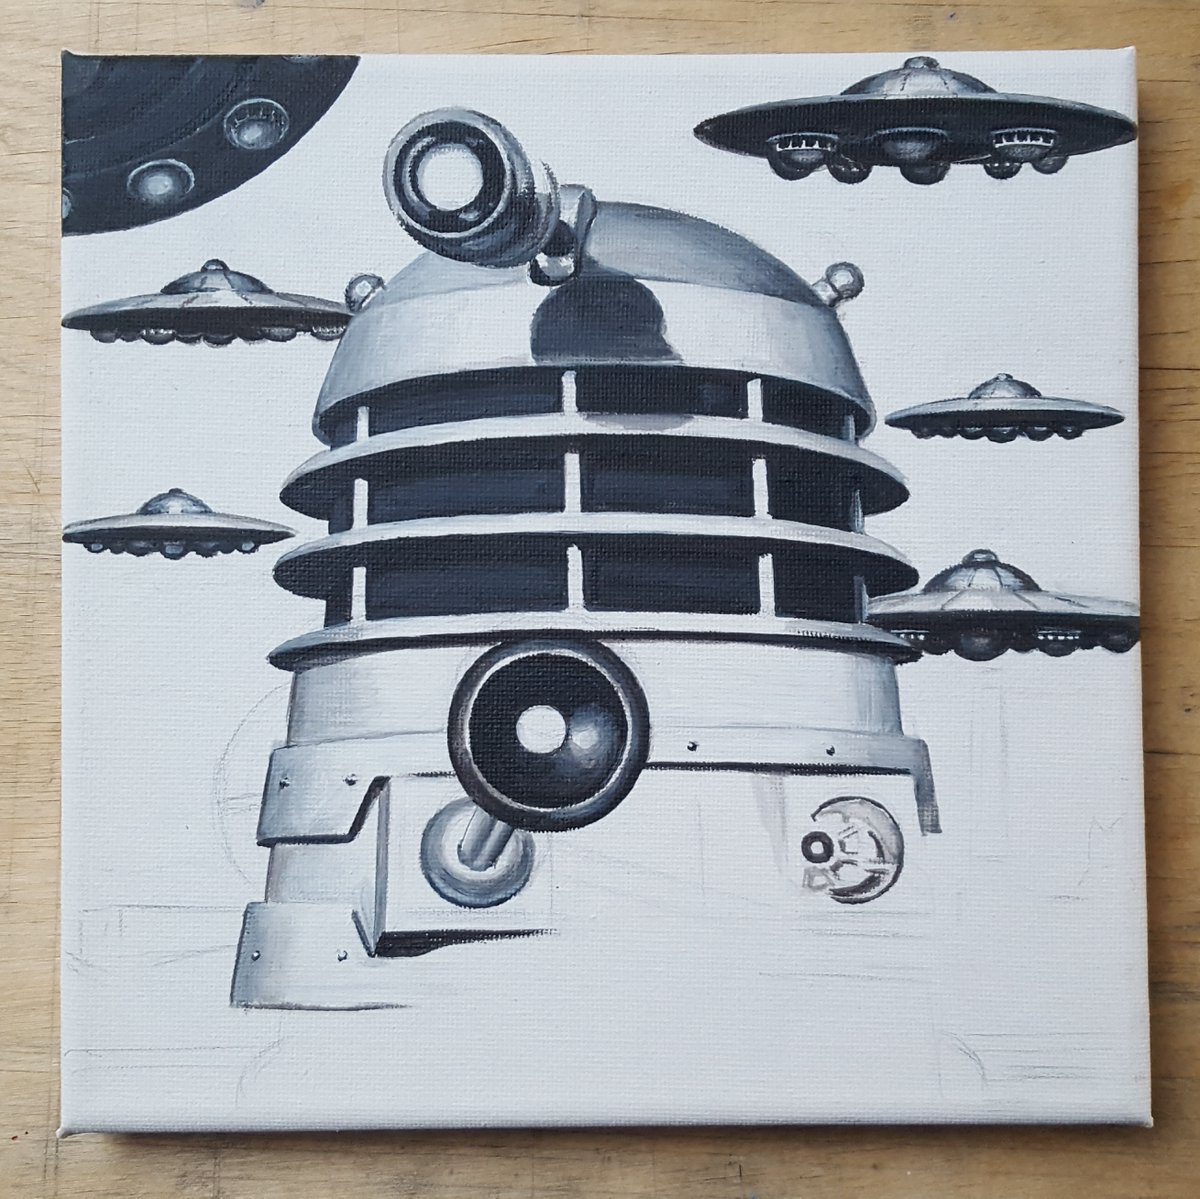 The Dalek Invasion of Earth is almost complete.. 😬 #DoctorWho #DrWho #DWfanart #WorkInProgress #Daleks #CanvasArt #Painting #Illustration #Art